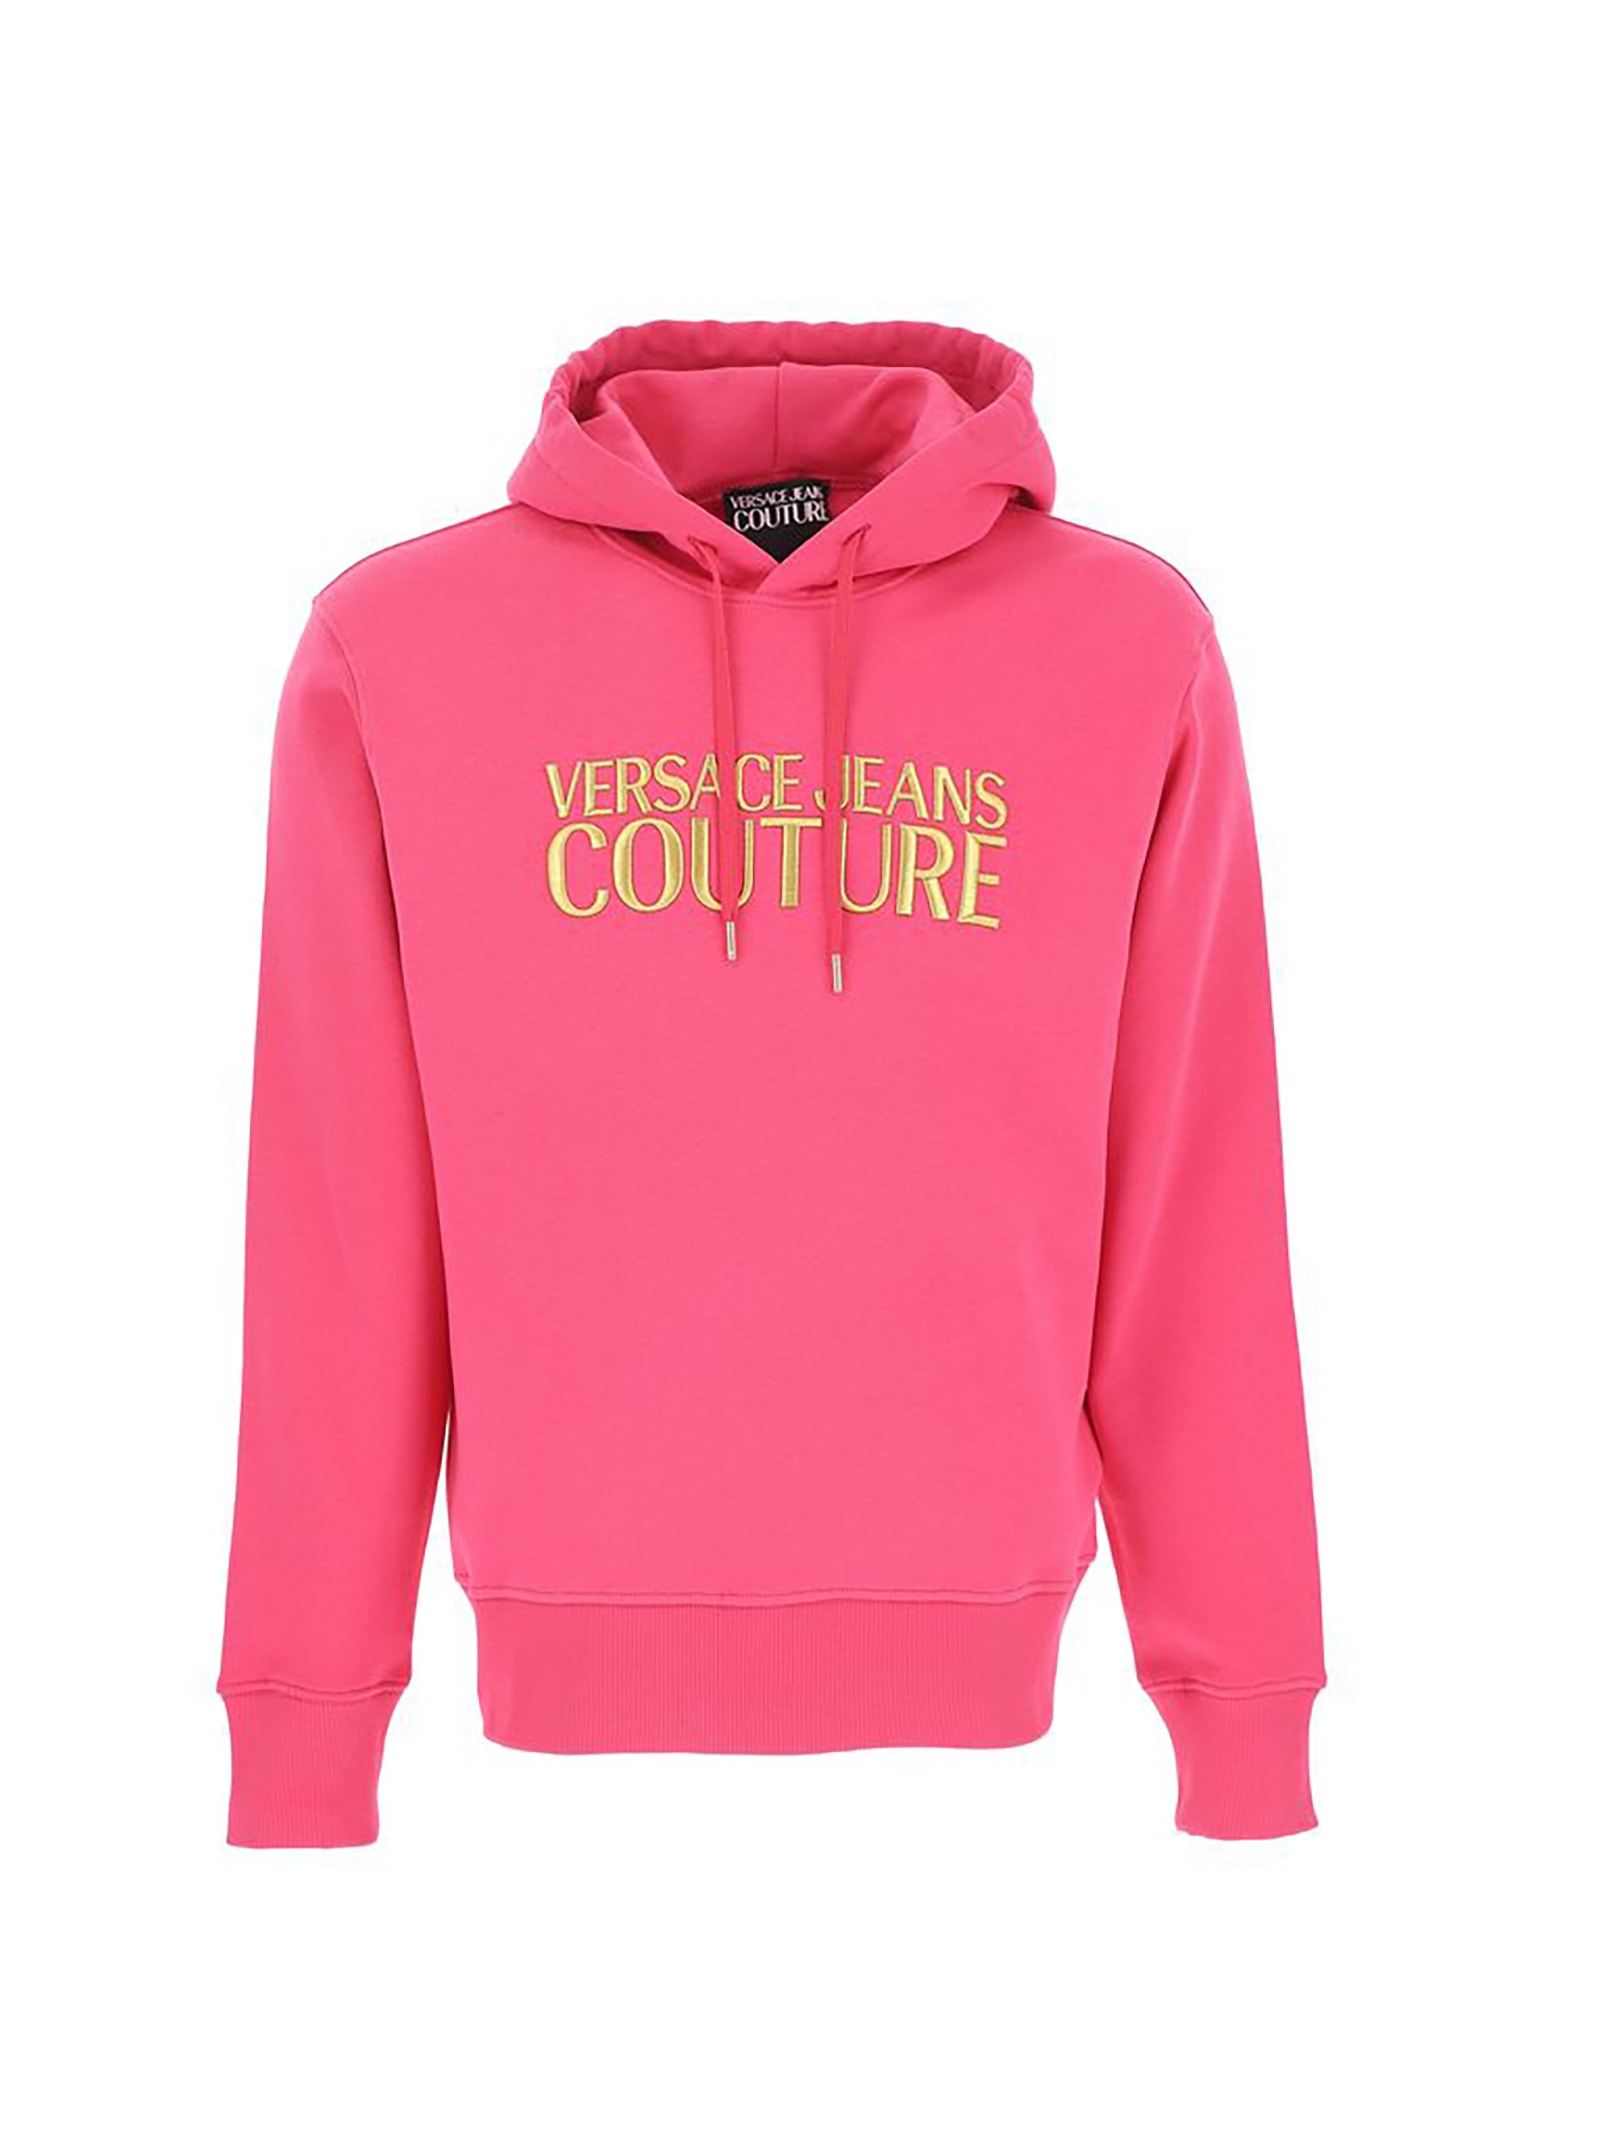 Versace Jeans Couture Hoodie Cotton Brand Name On Chest